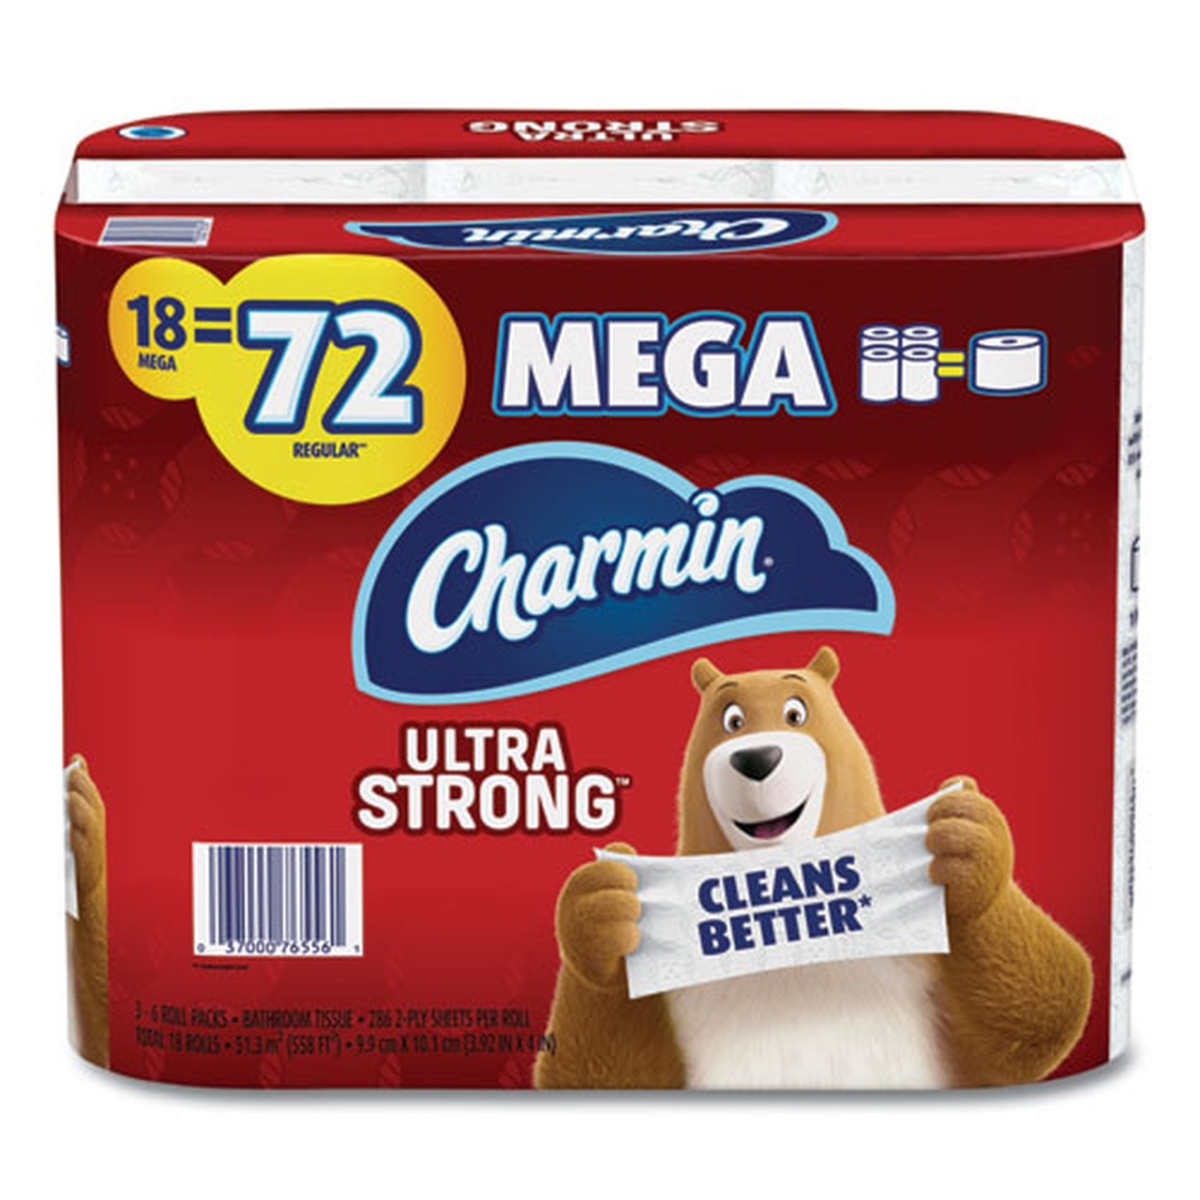 Picture of Charmin PGC61079 18 Meg Standard Roll Bathroom Tissue Ultra Strong - Pack of 18